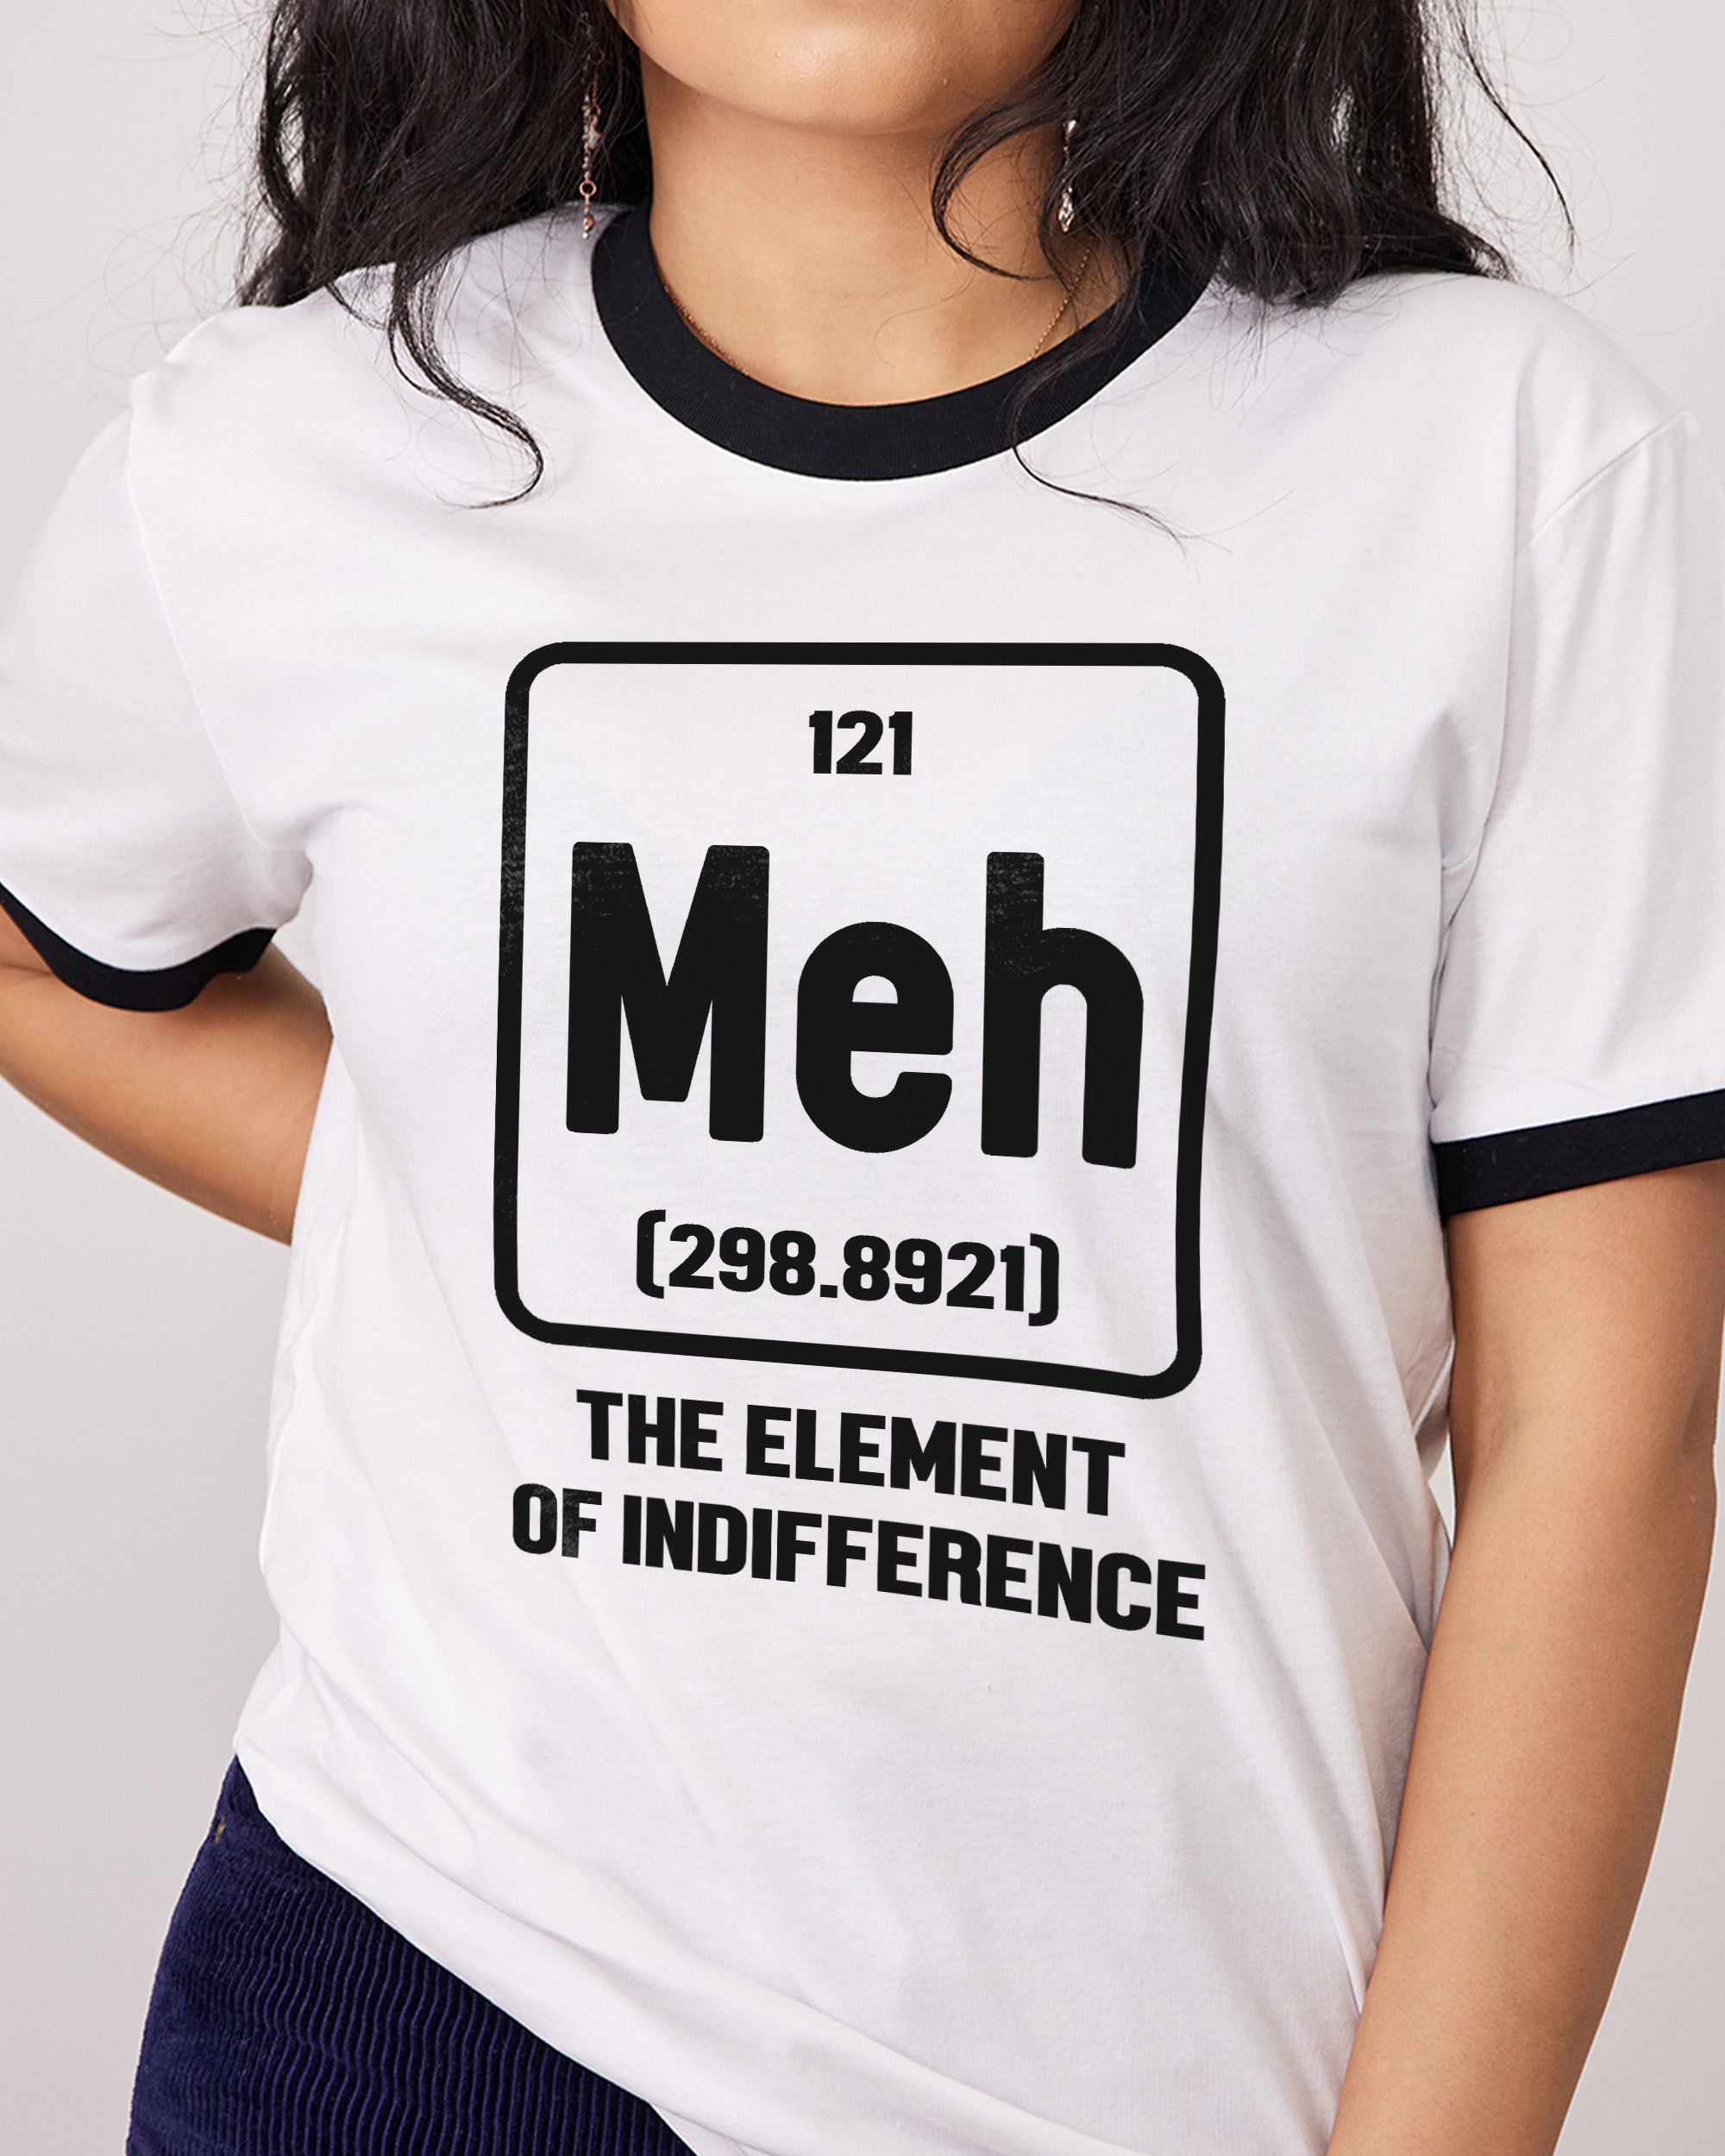 Meh The Element of Indifference T-Shirt